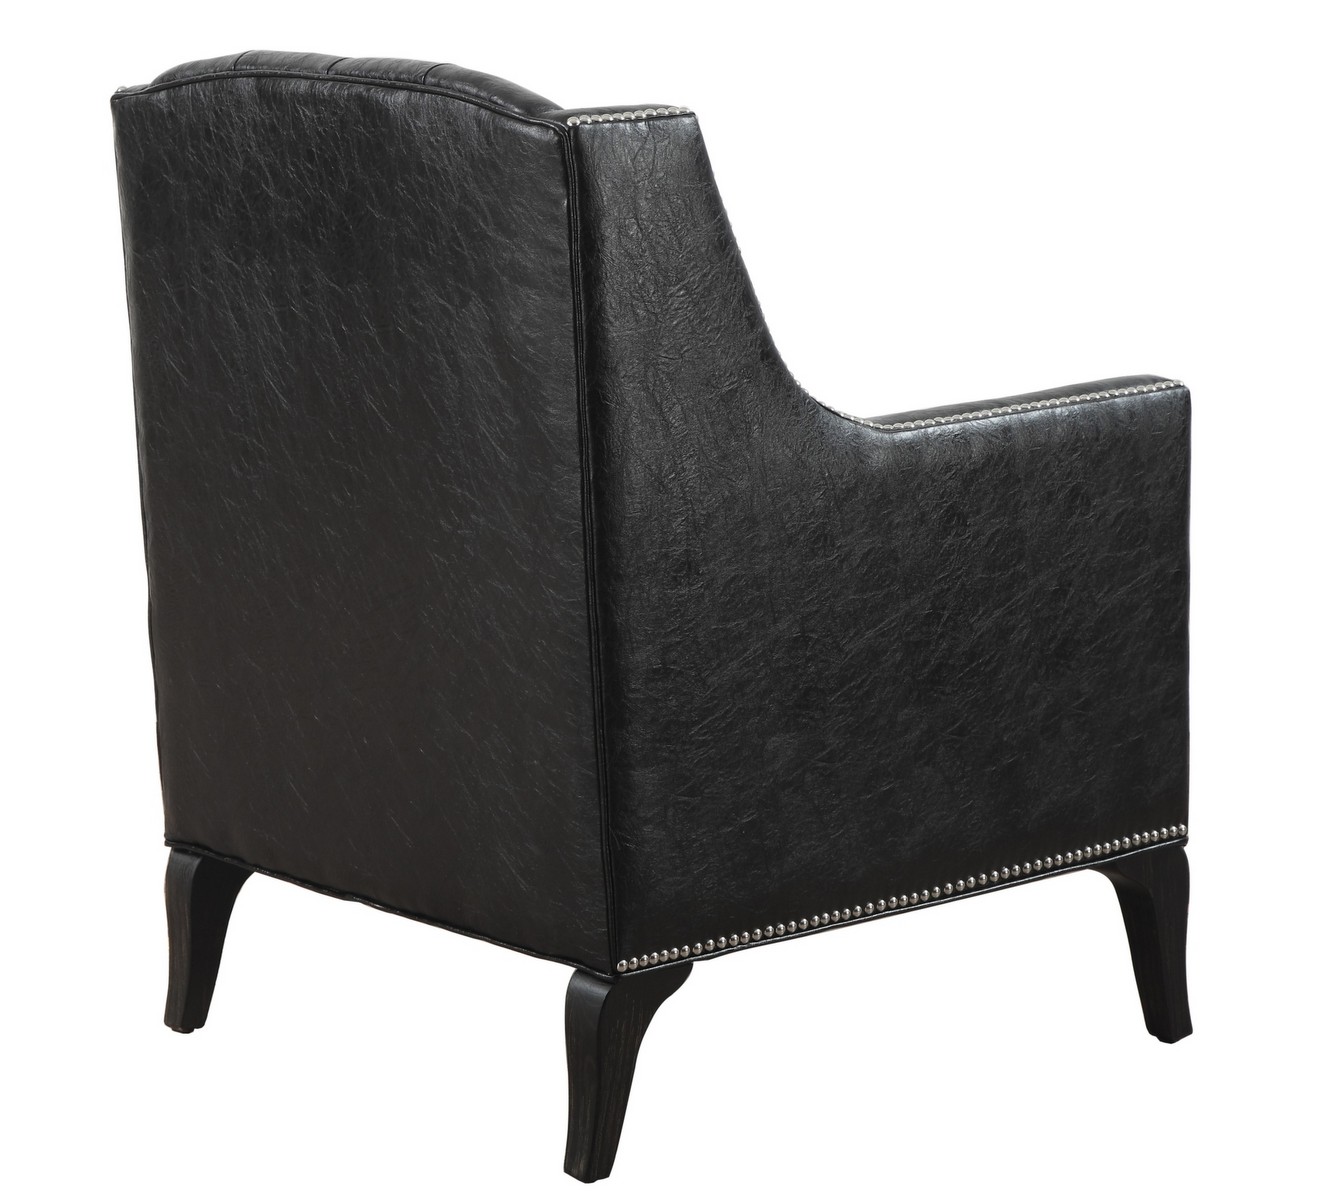 TOV Furniture Roxbury Leather Club Chair A45 at Homelement.com